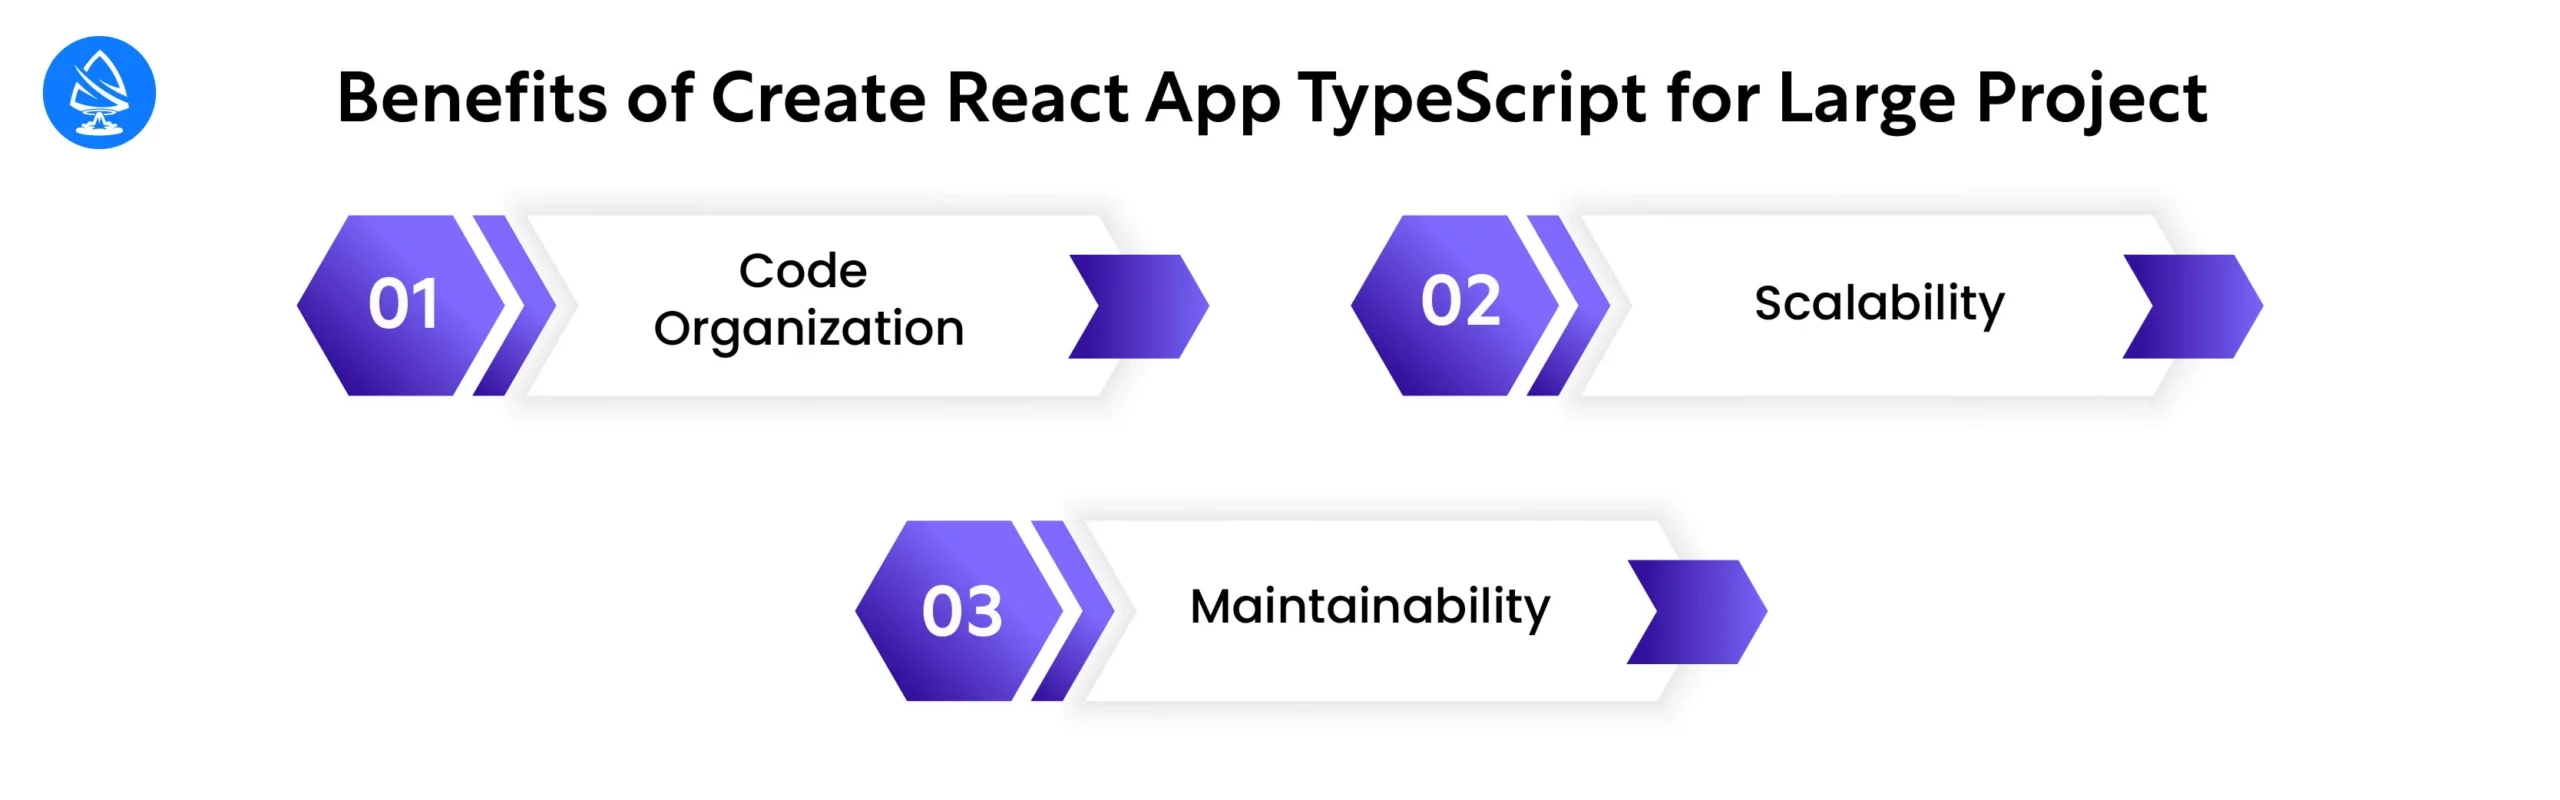 Benefits of Create React App TypeScript for Large Project